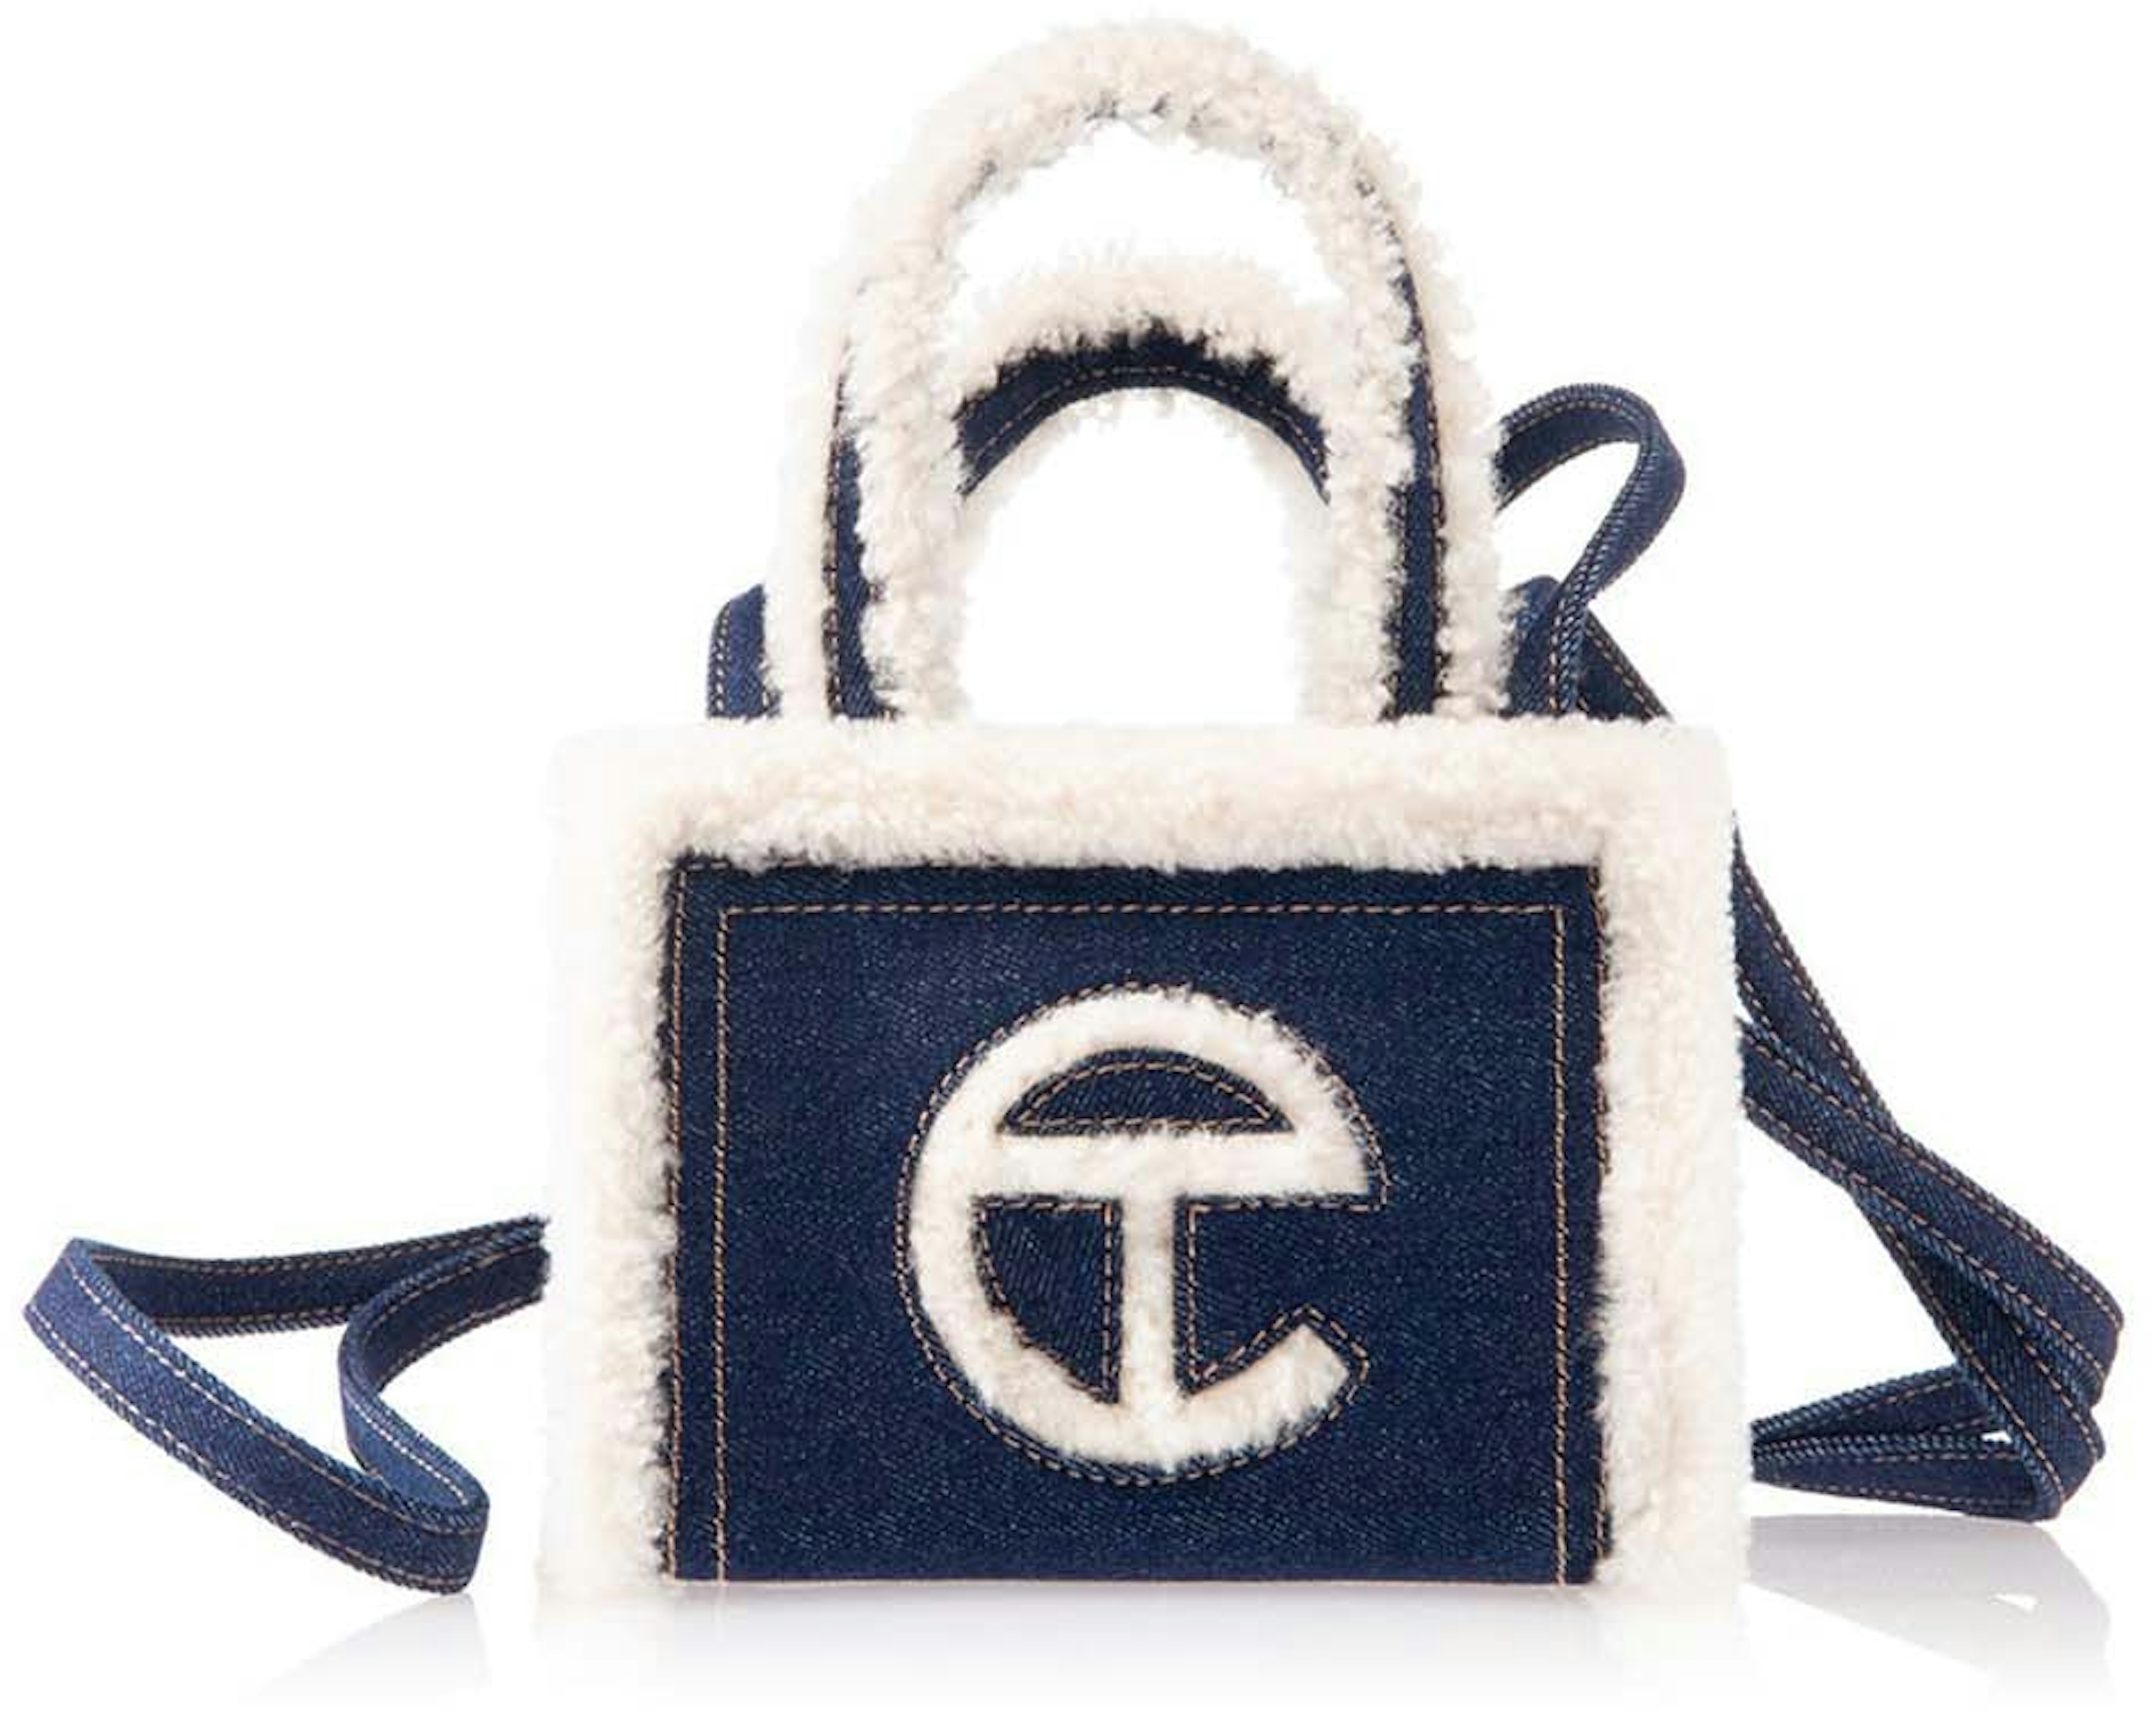 The Fashion Set Can't Get Enough of These 7 Telfar Bags